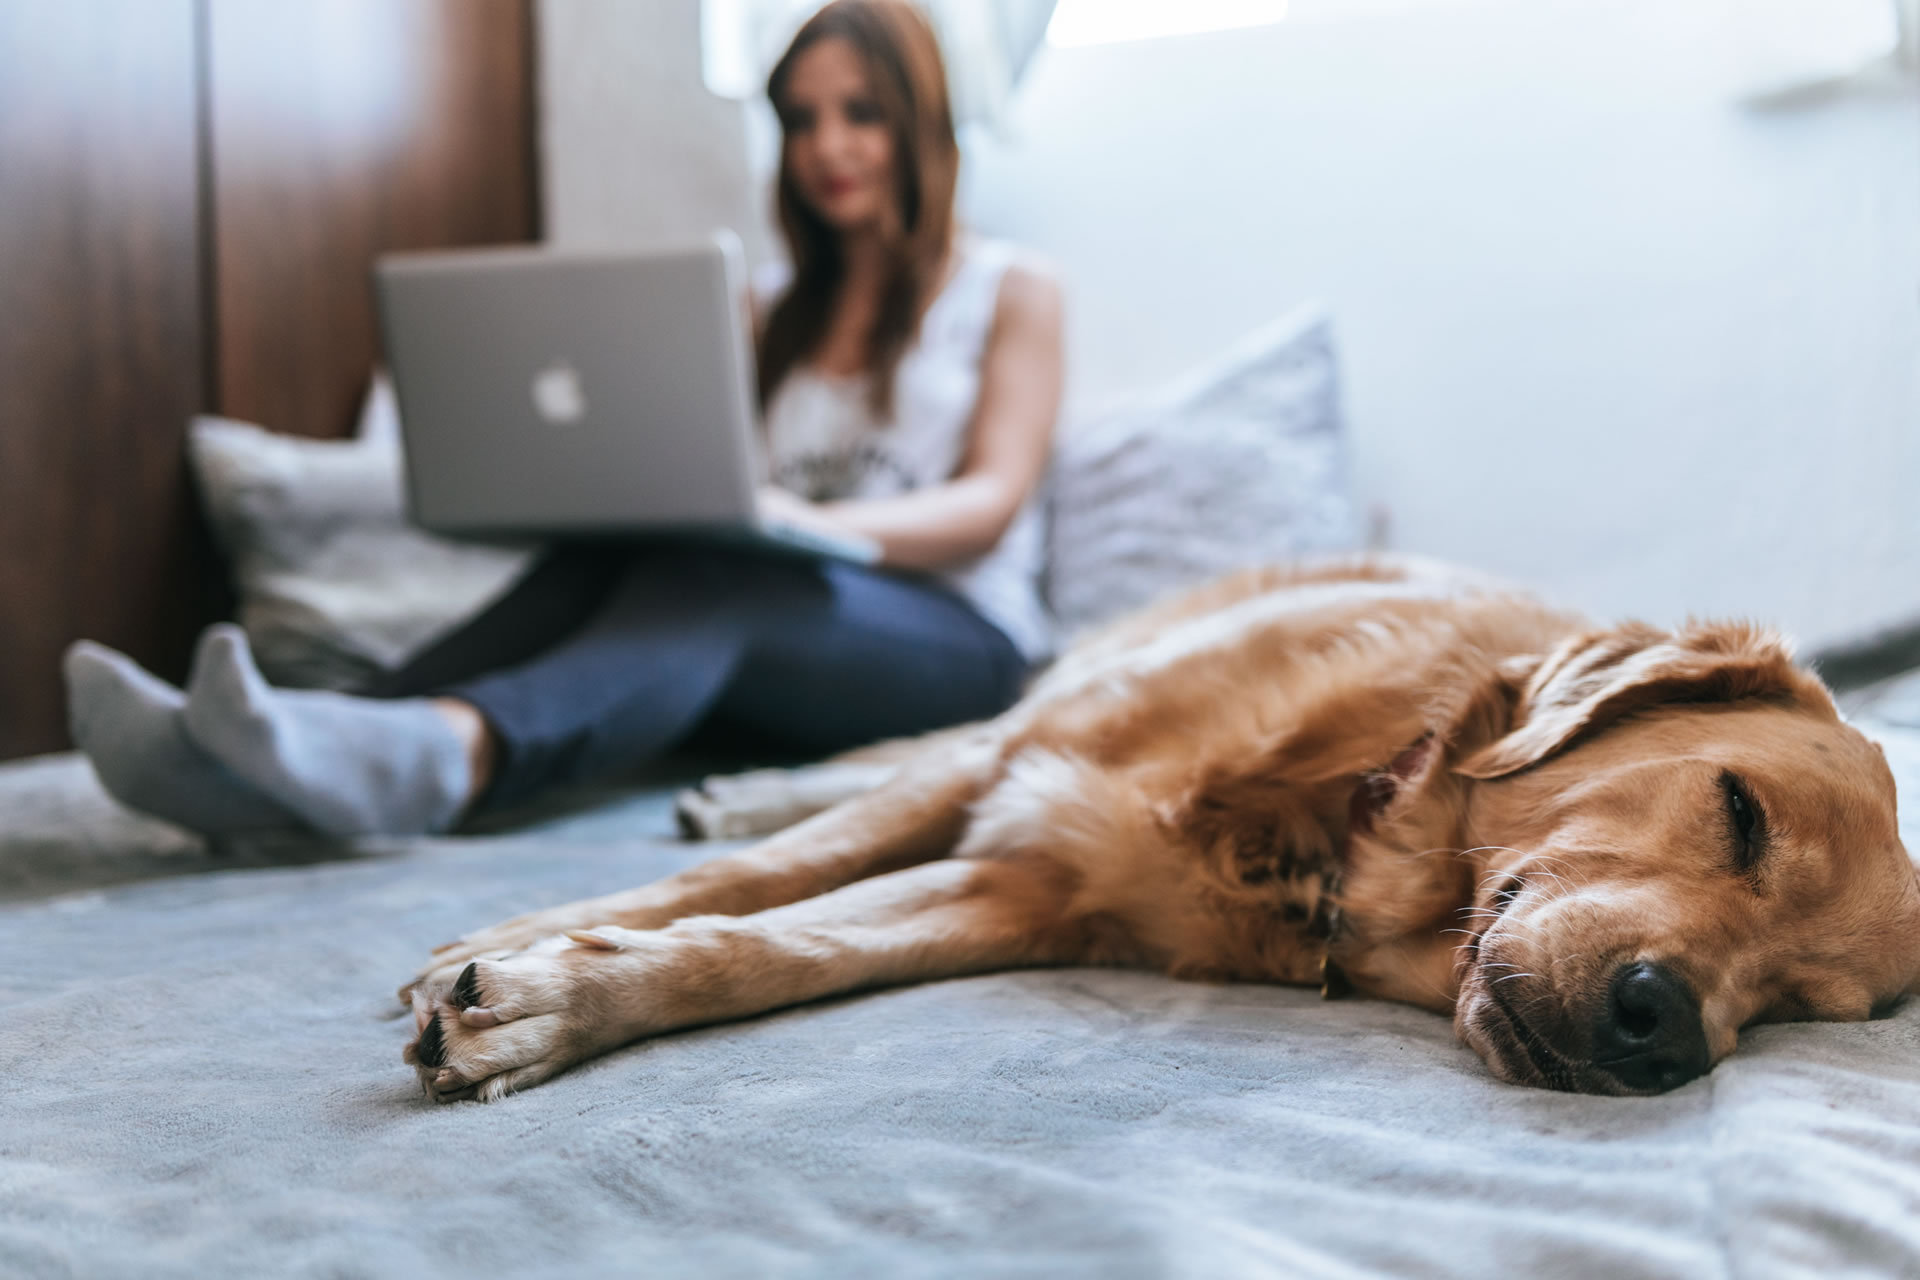 A dog lying in bed next to a woman on her laptop.